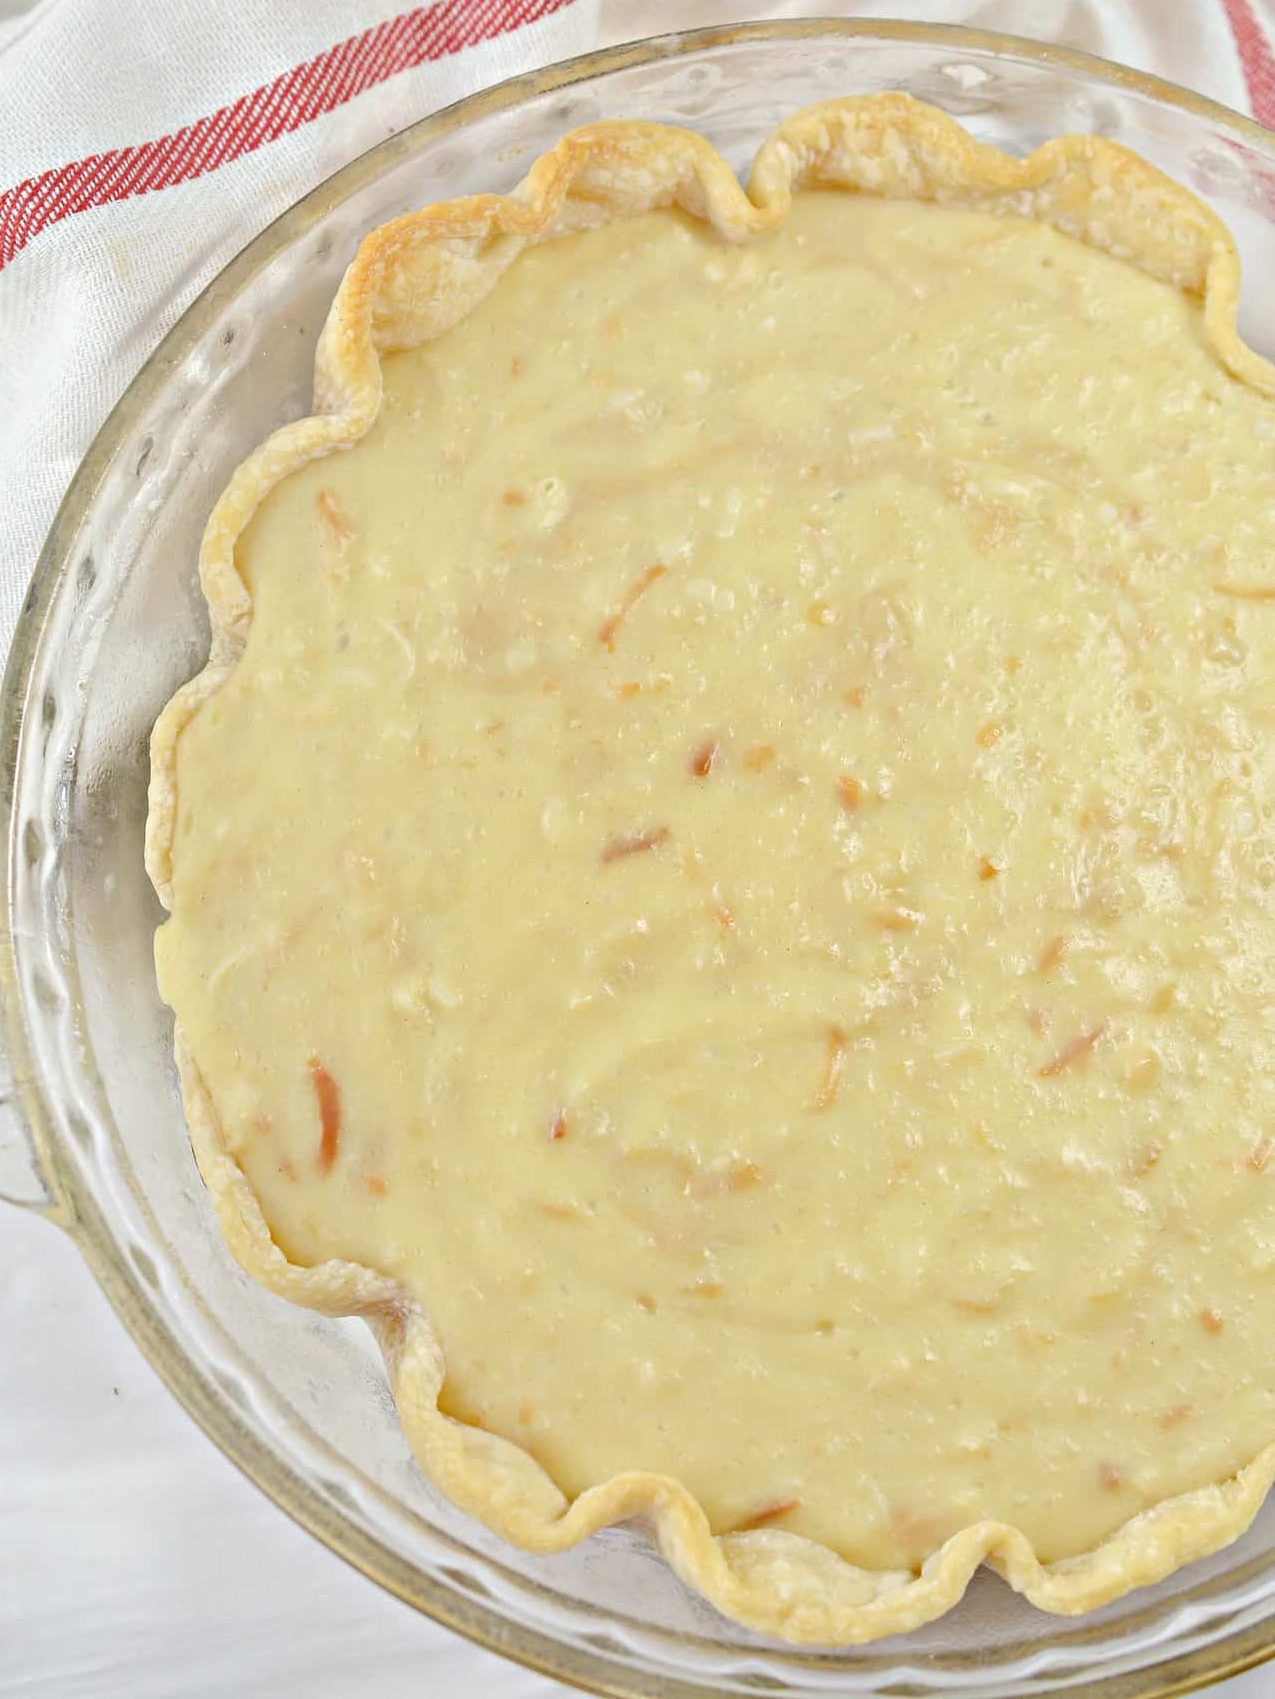 Pour the filling mixture into the prebaked pie crust and allow to cool.